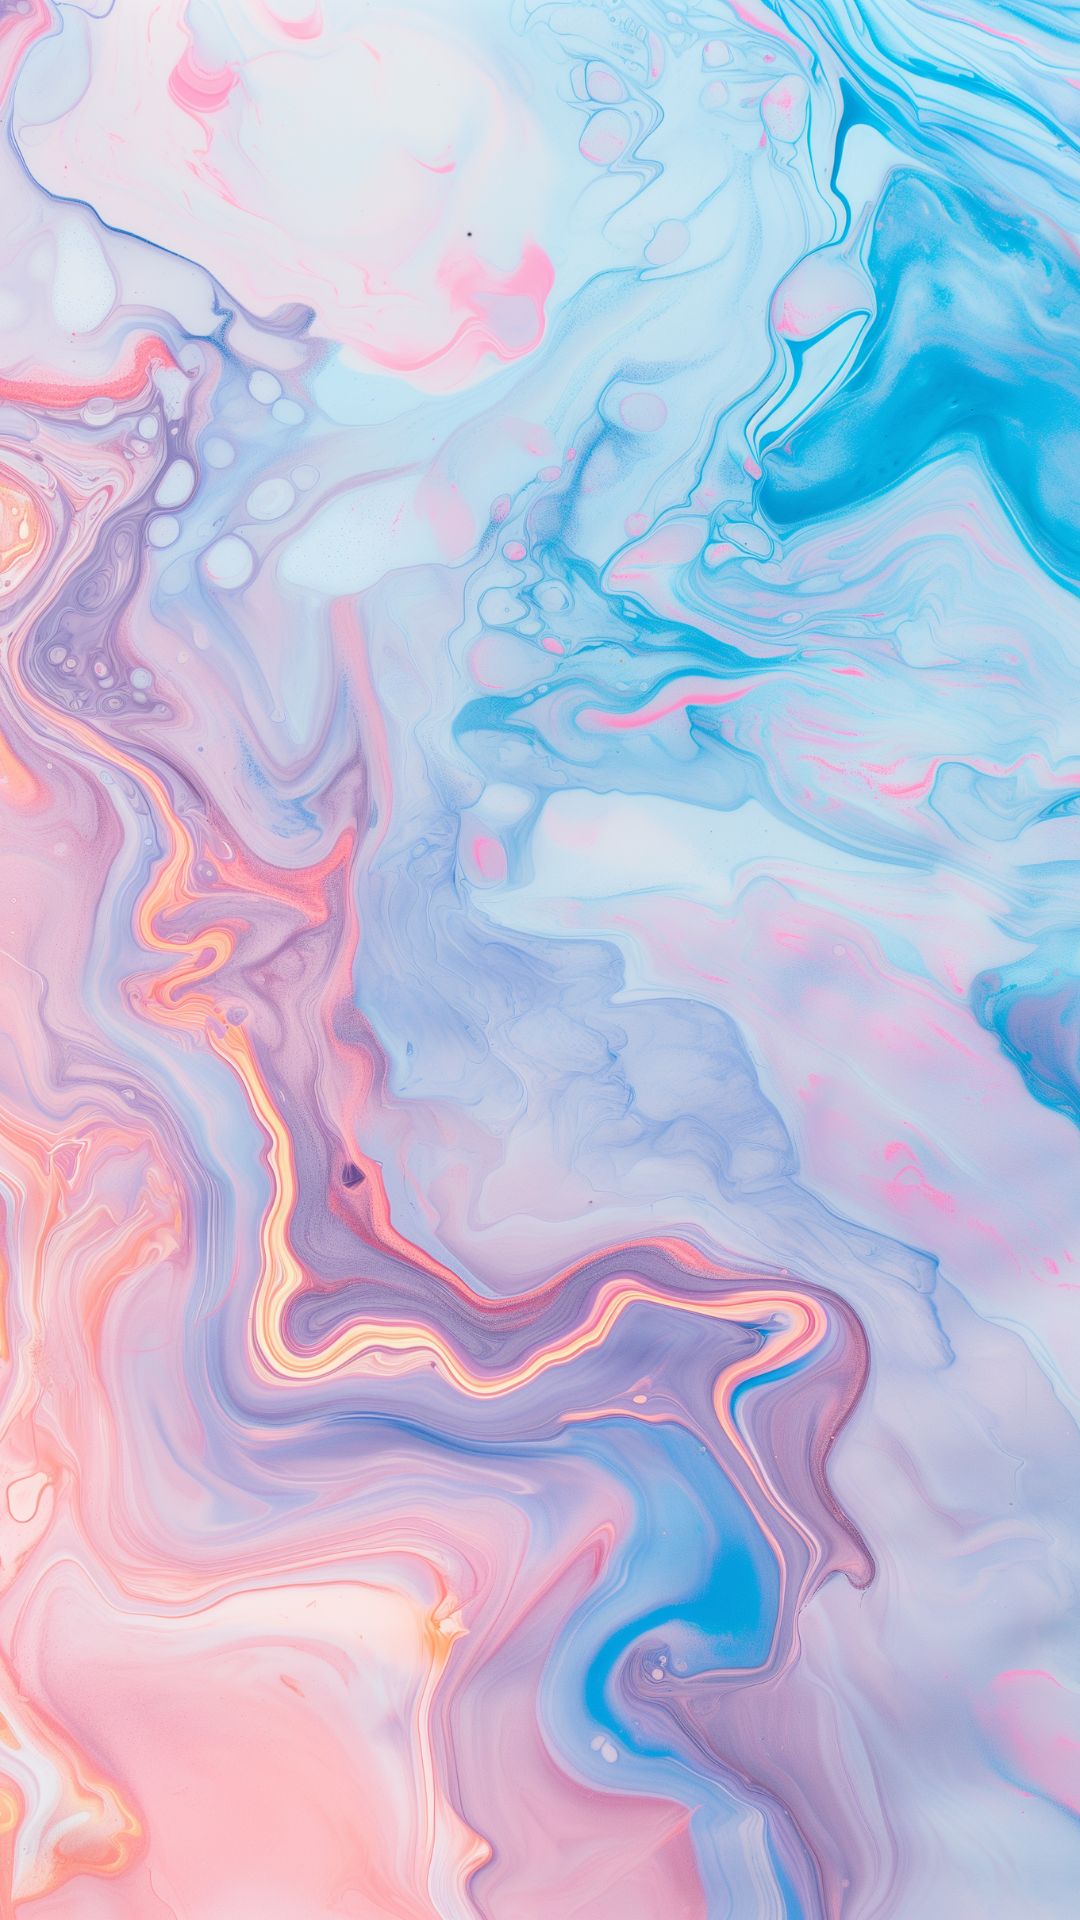 Upgrade Your Aesthetic with 24 Stunning Marble iPhone Wallpapers + 10 Midjourney Prompts - Sprinkle of AI Art